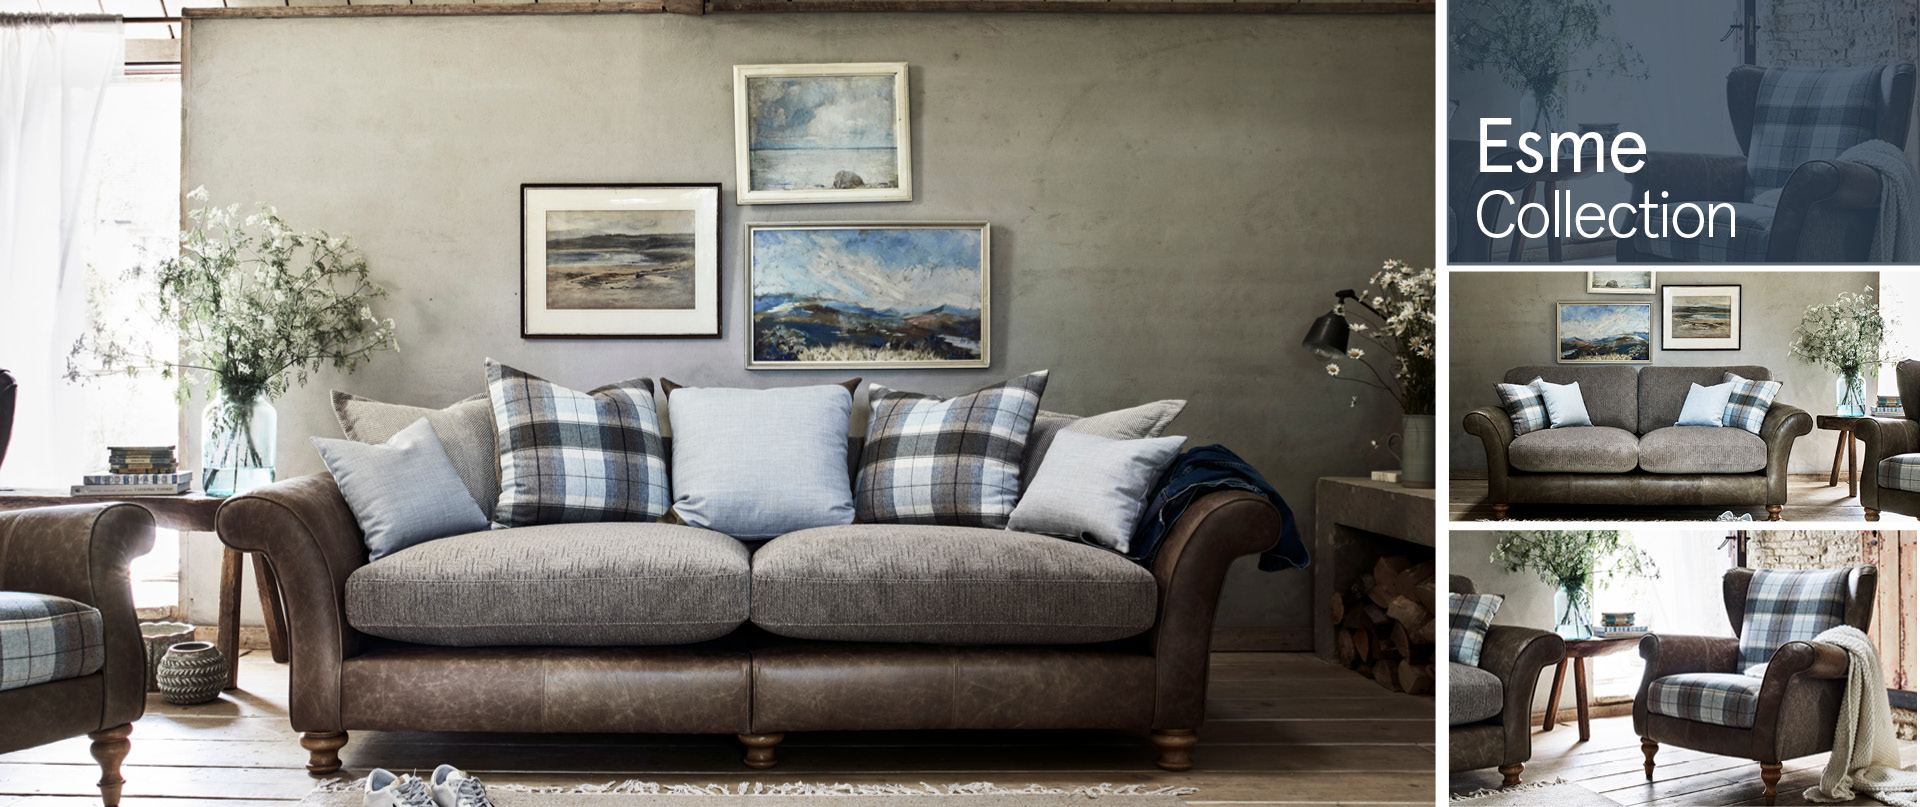 All-Leather-and-Fabric-Mix-Sofas-Ranges